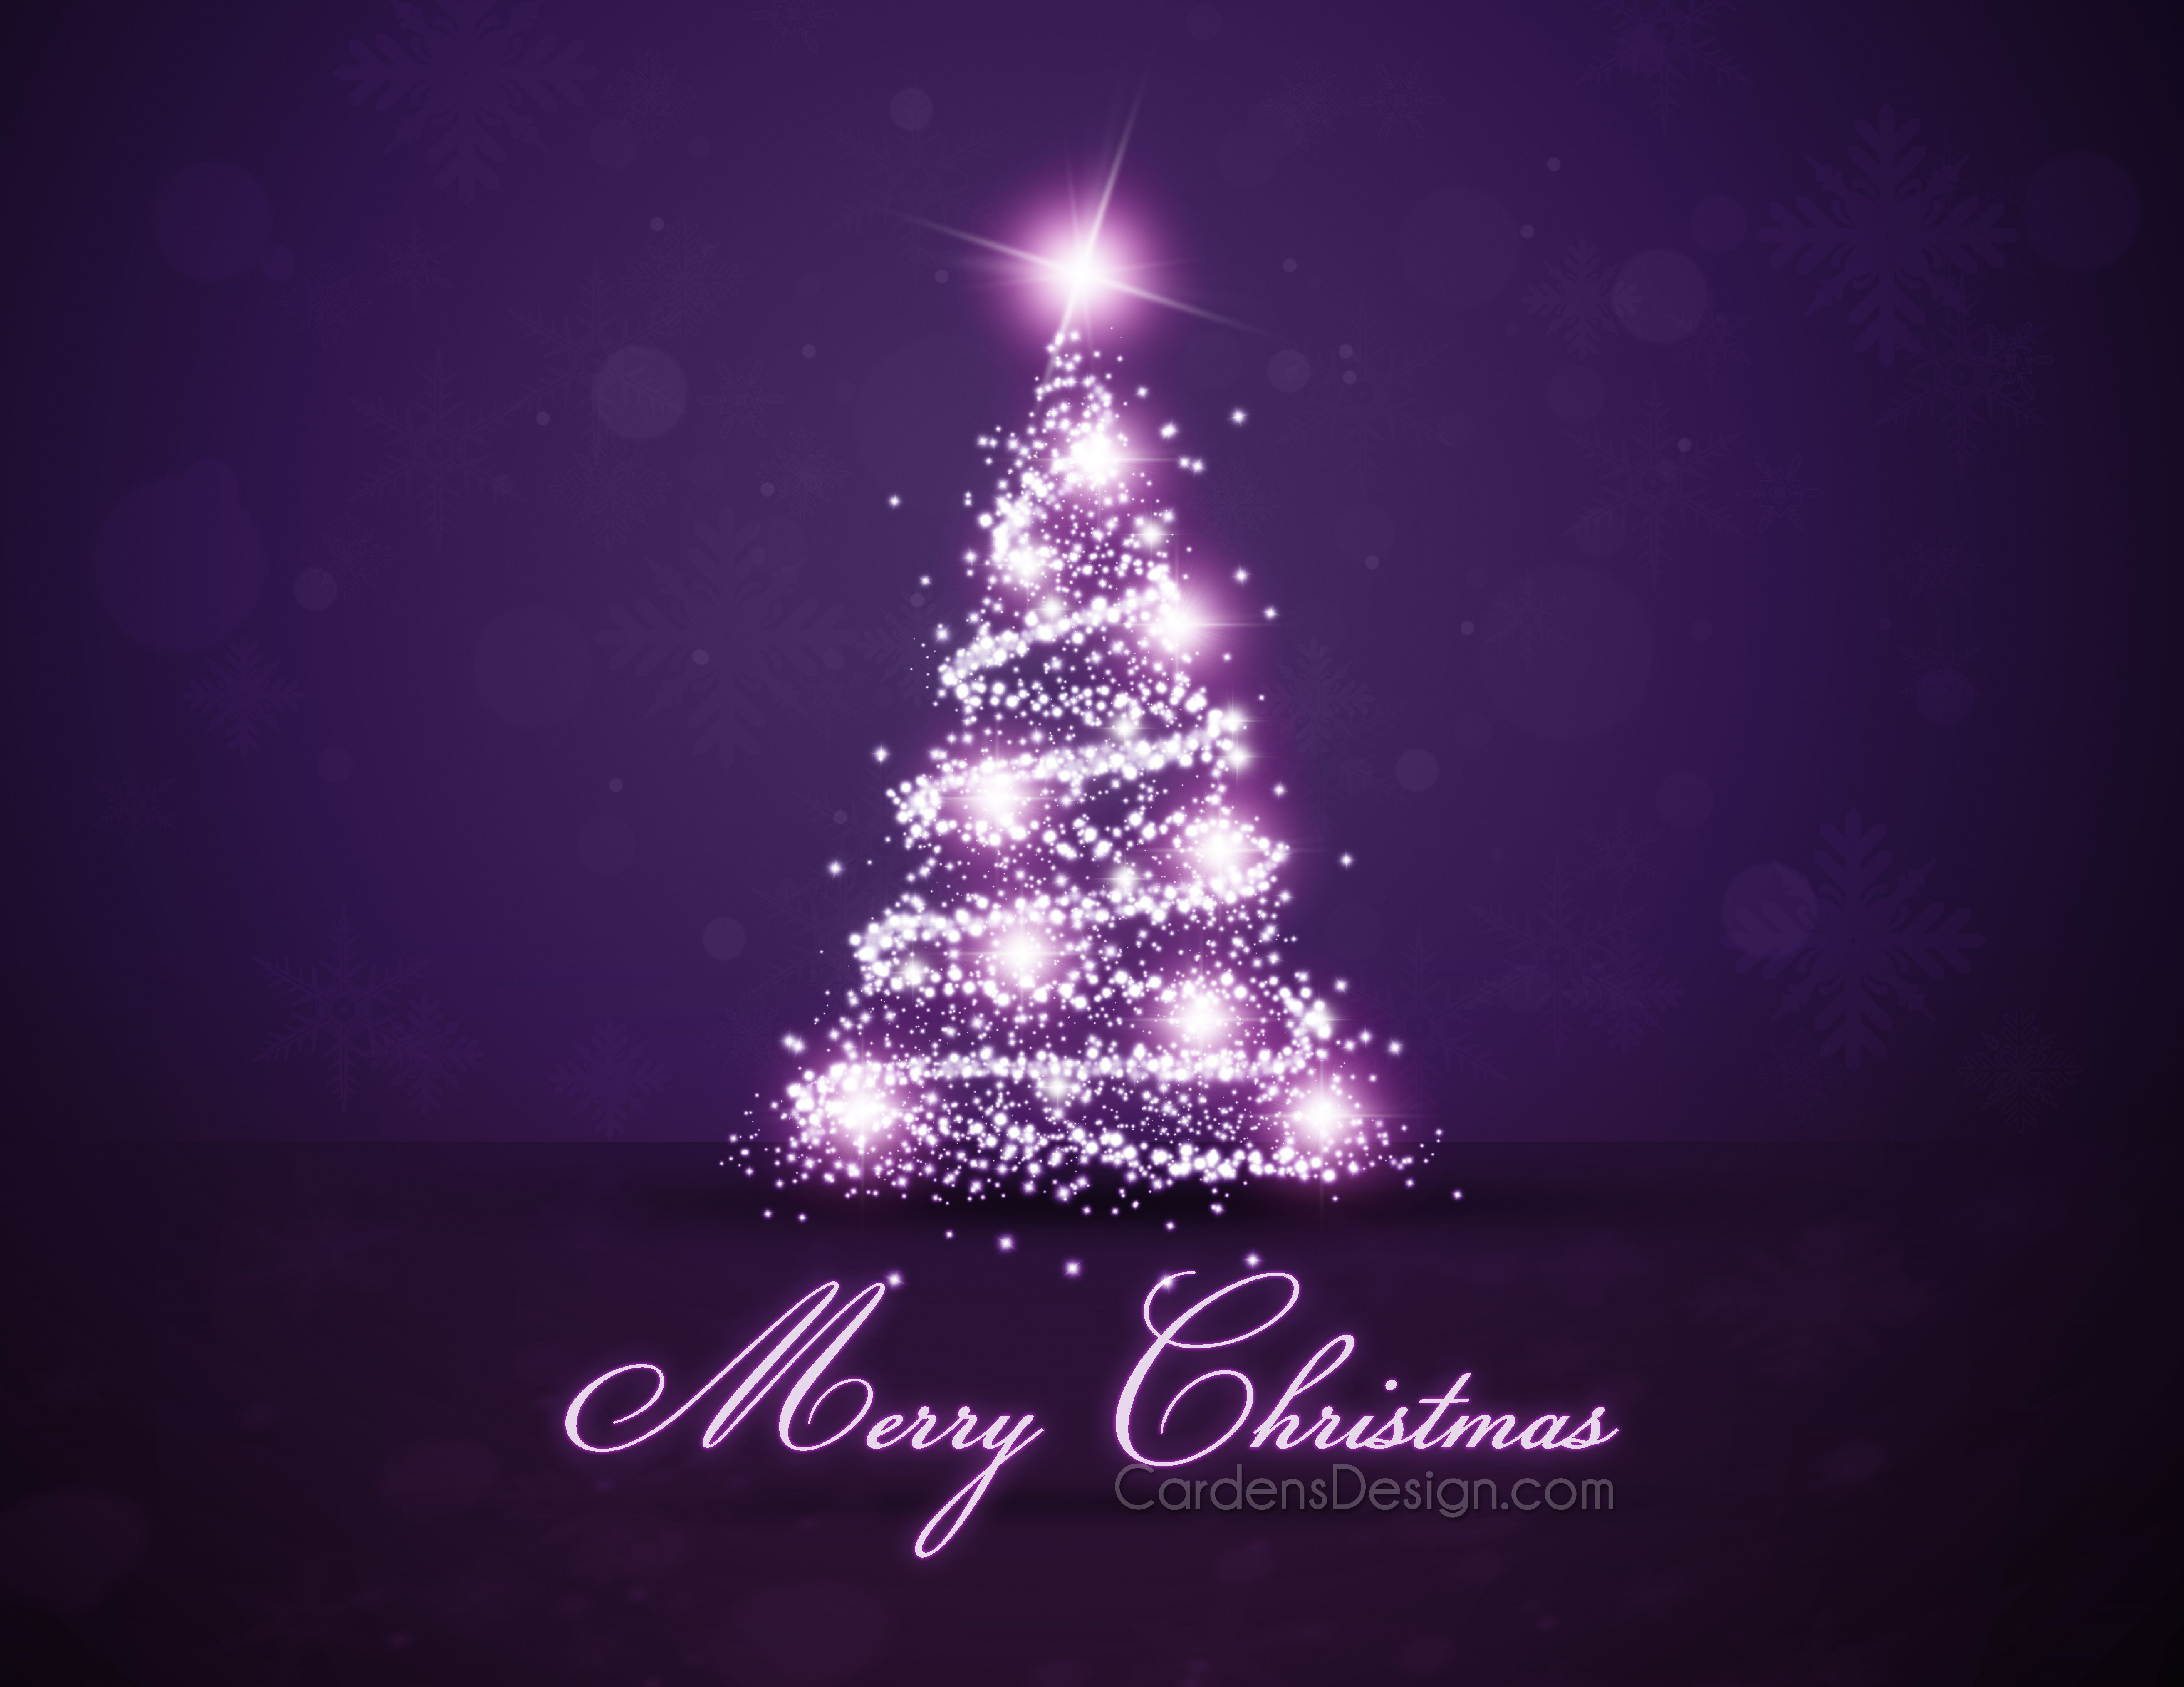 Christmas Tree For New Year On The Violet Background